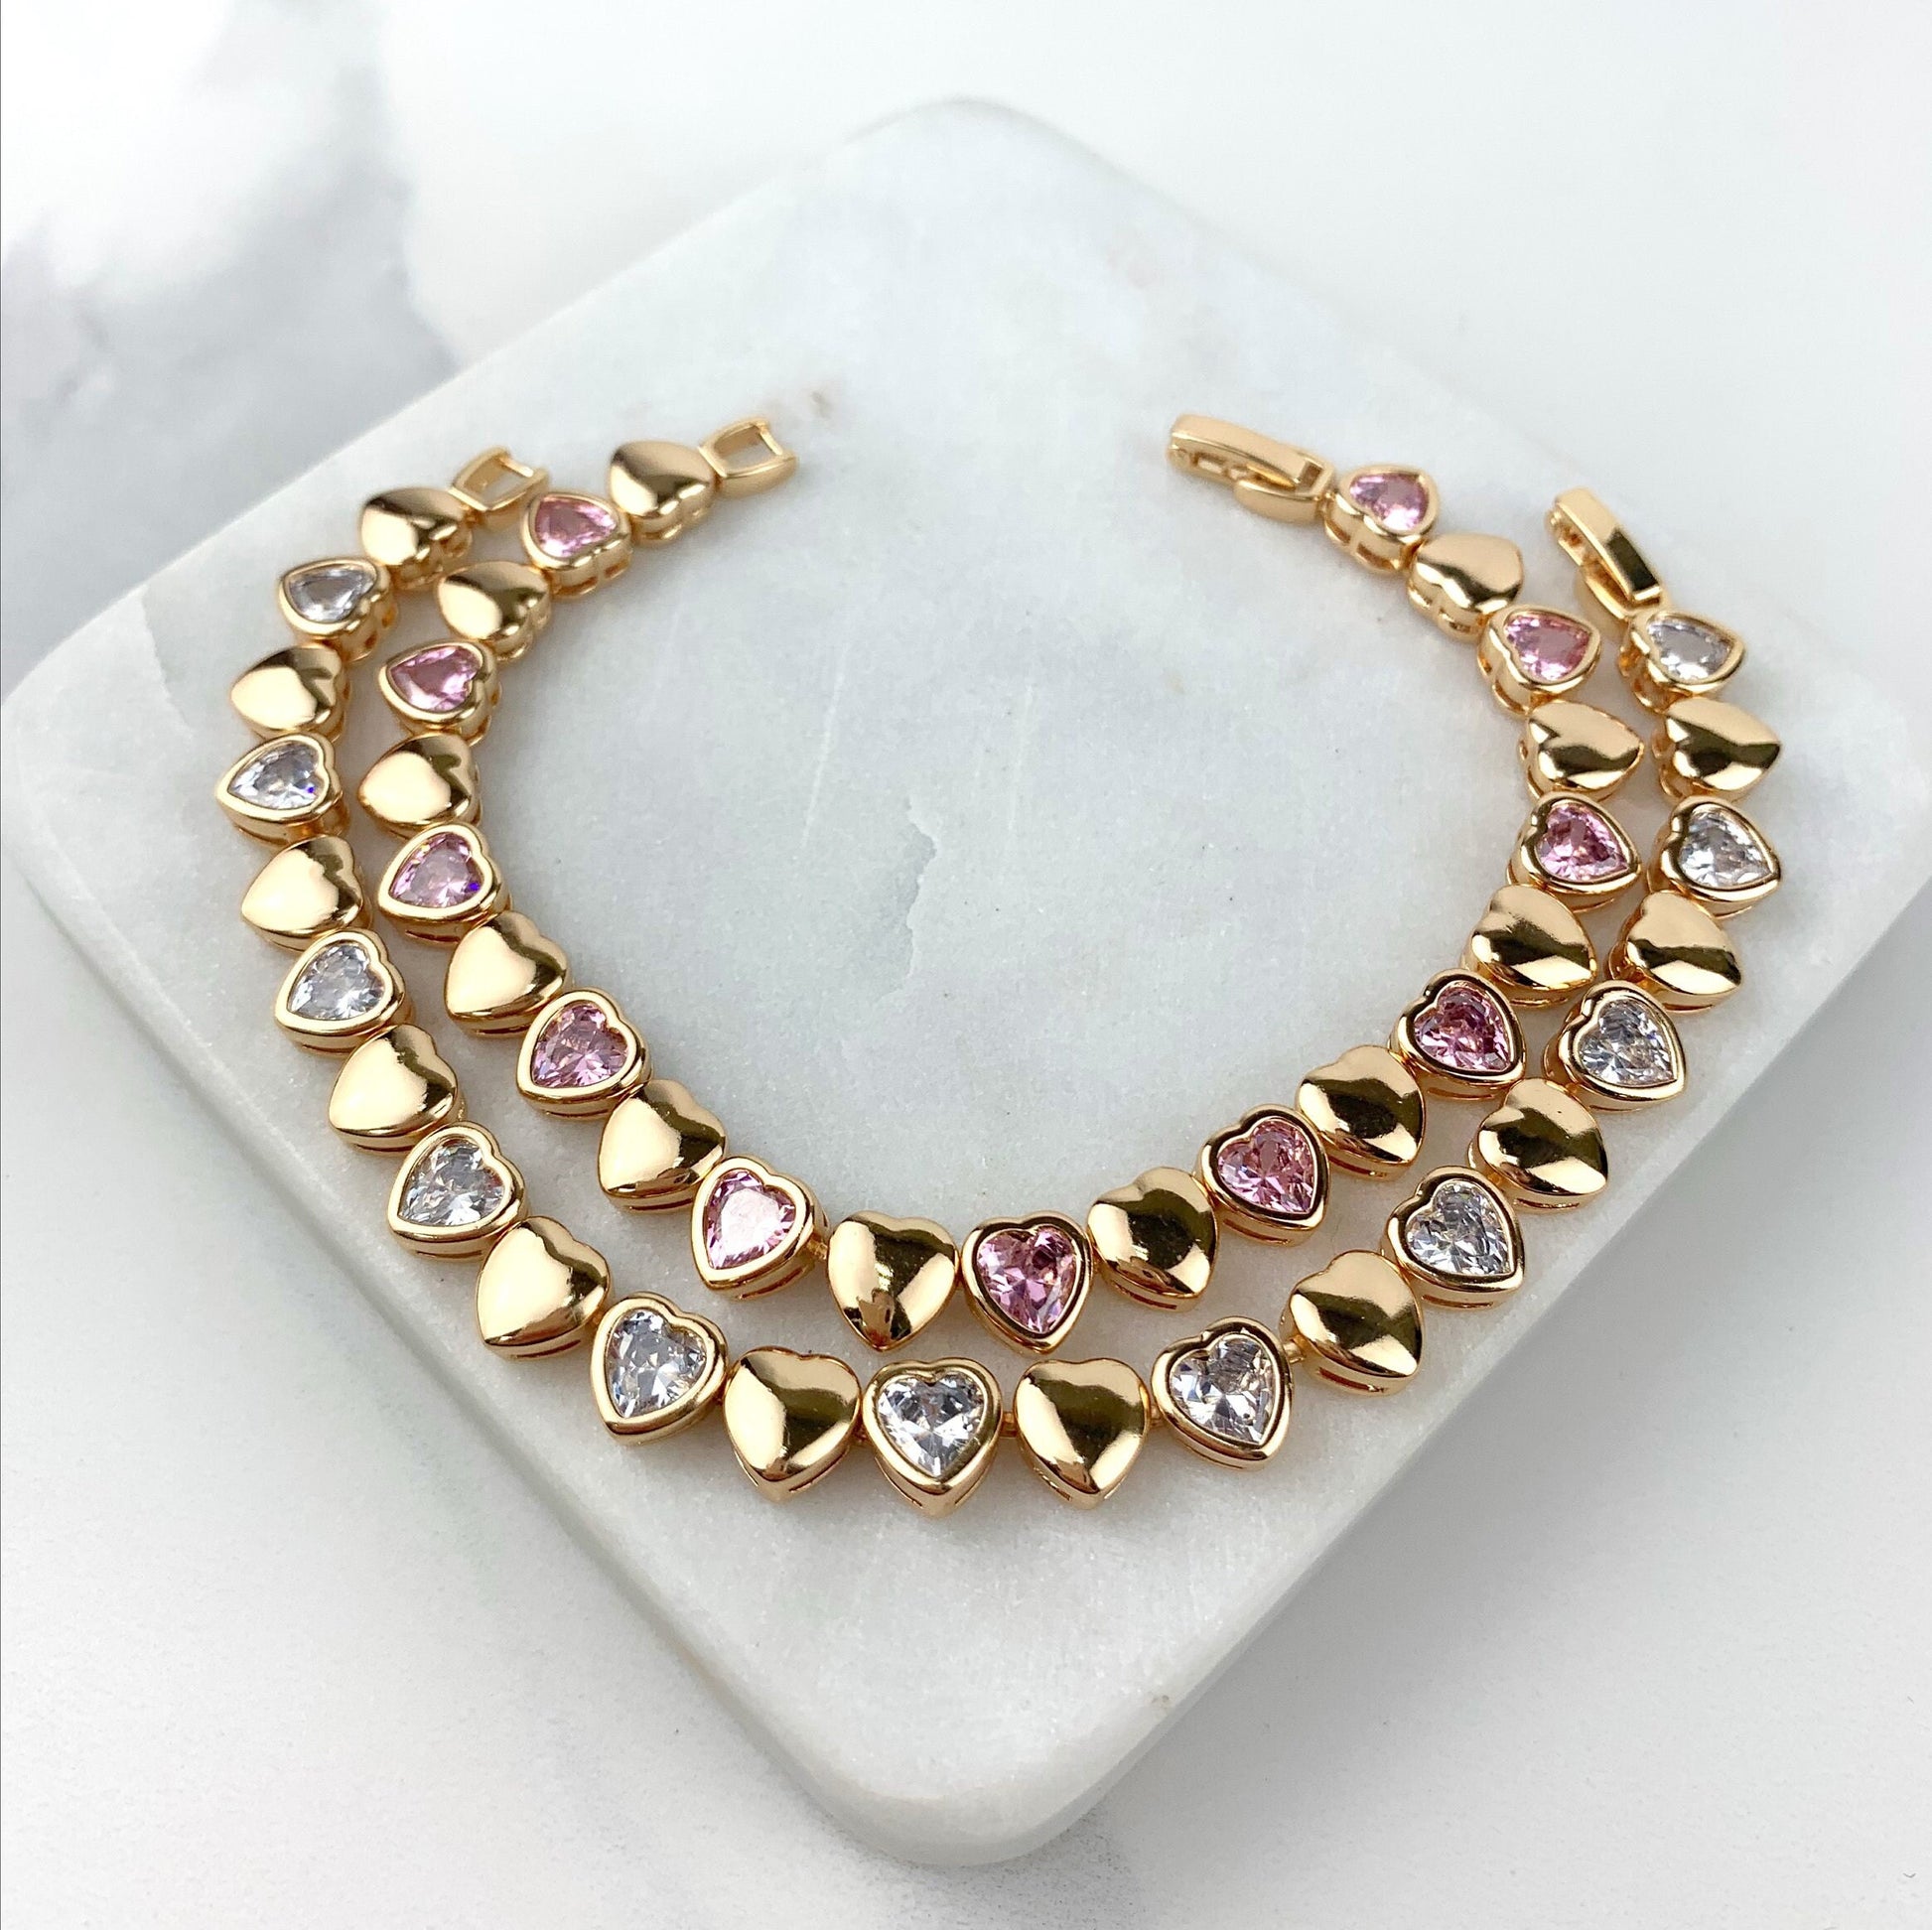 18k Rose Gold Filled Bracelet Featuring Pink or Clear Zirconia, Heart or Circle Shape, Wholesale Jewelry Supplies